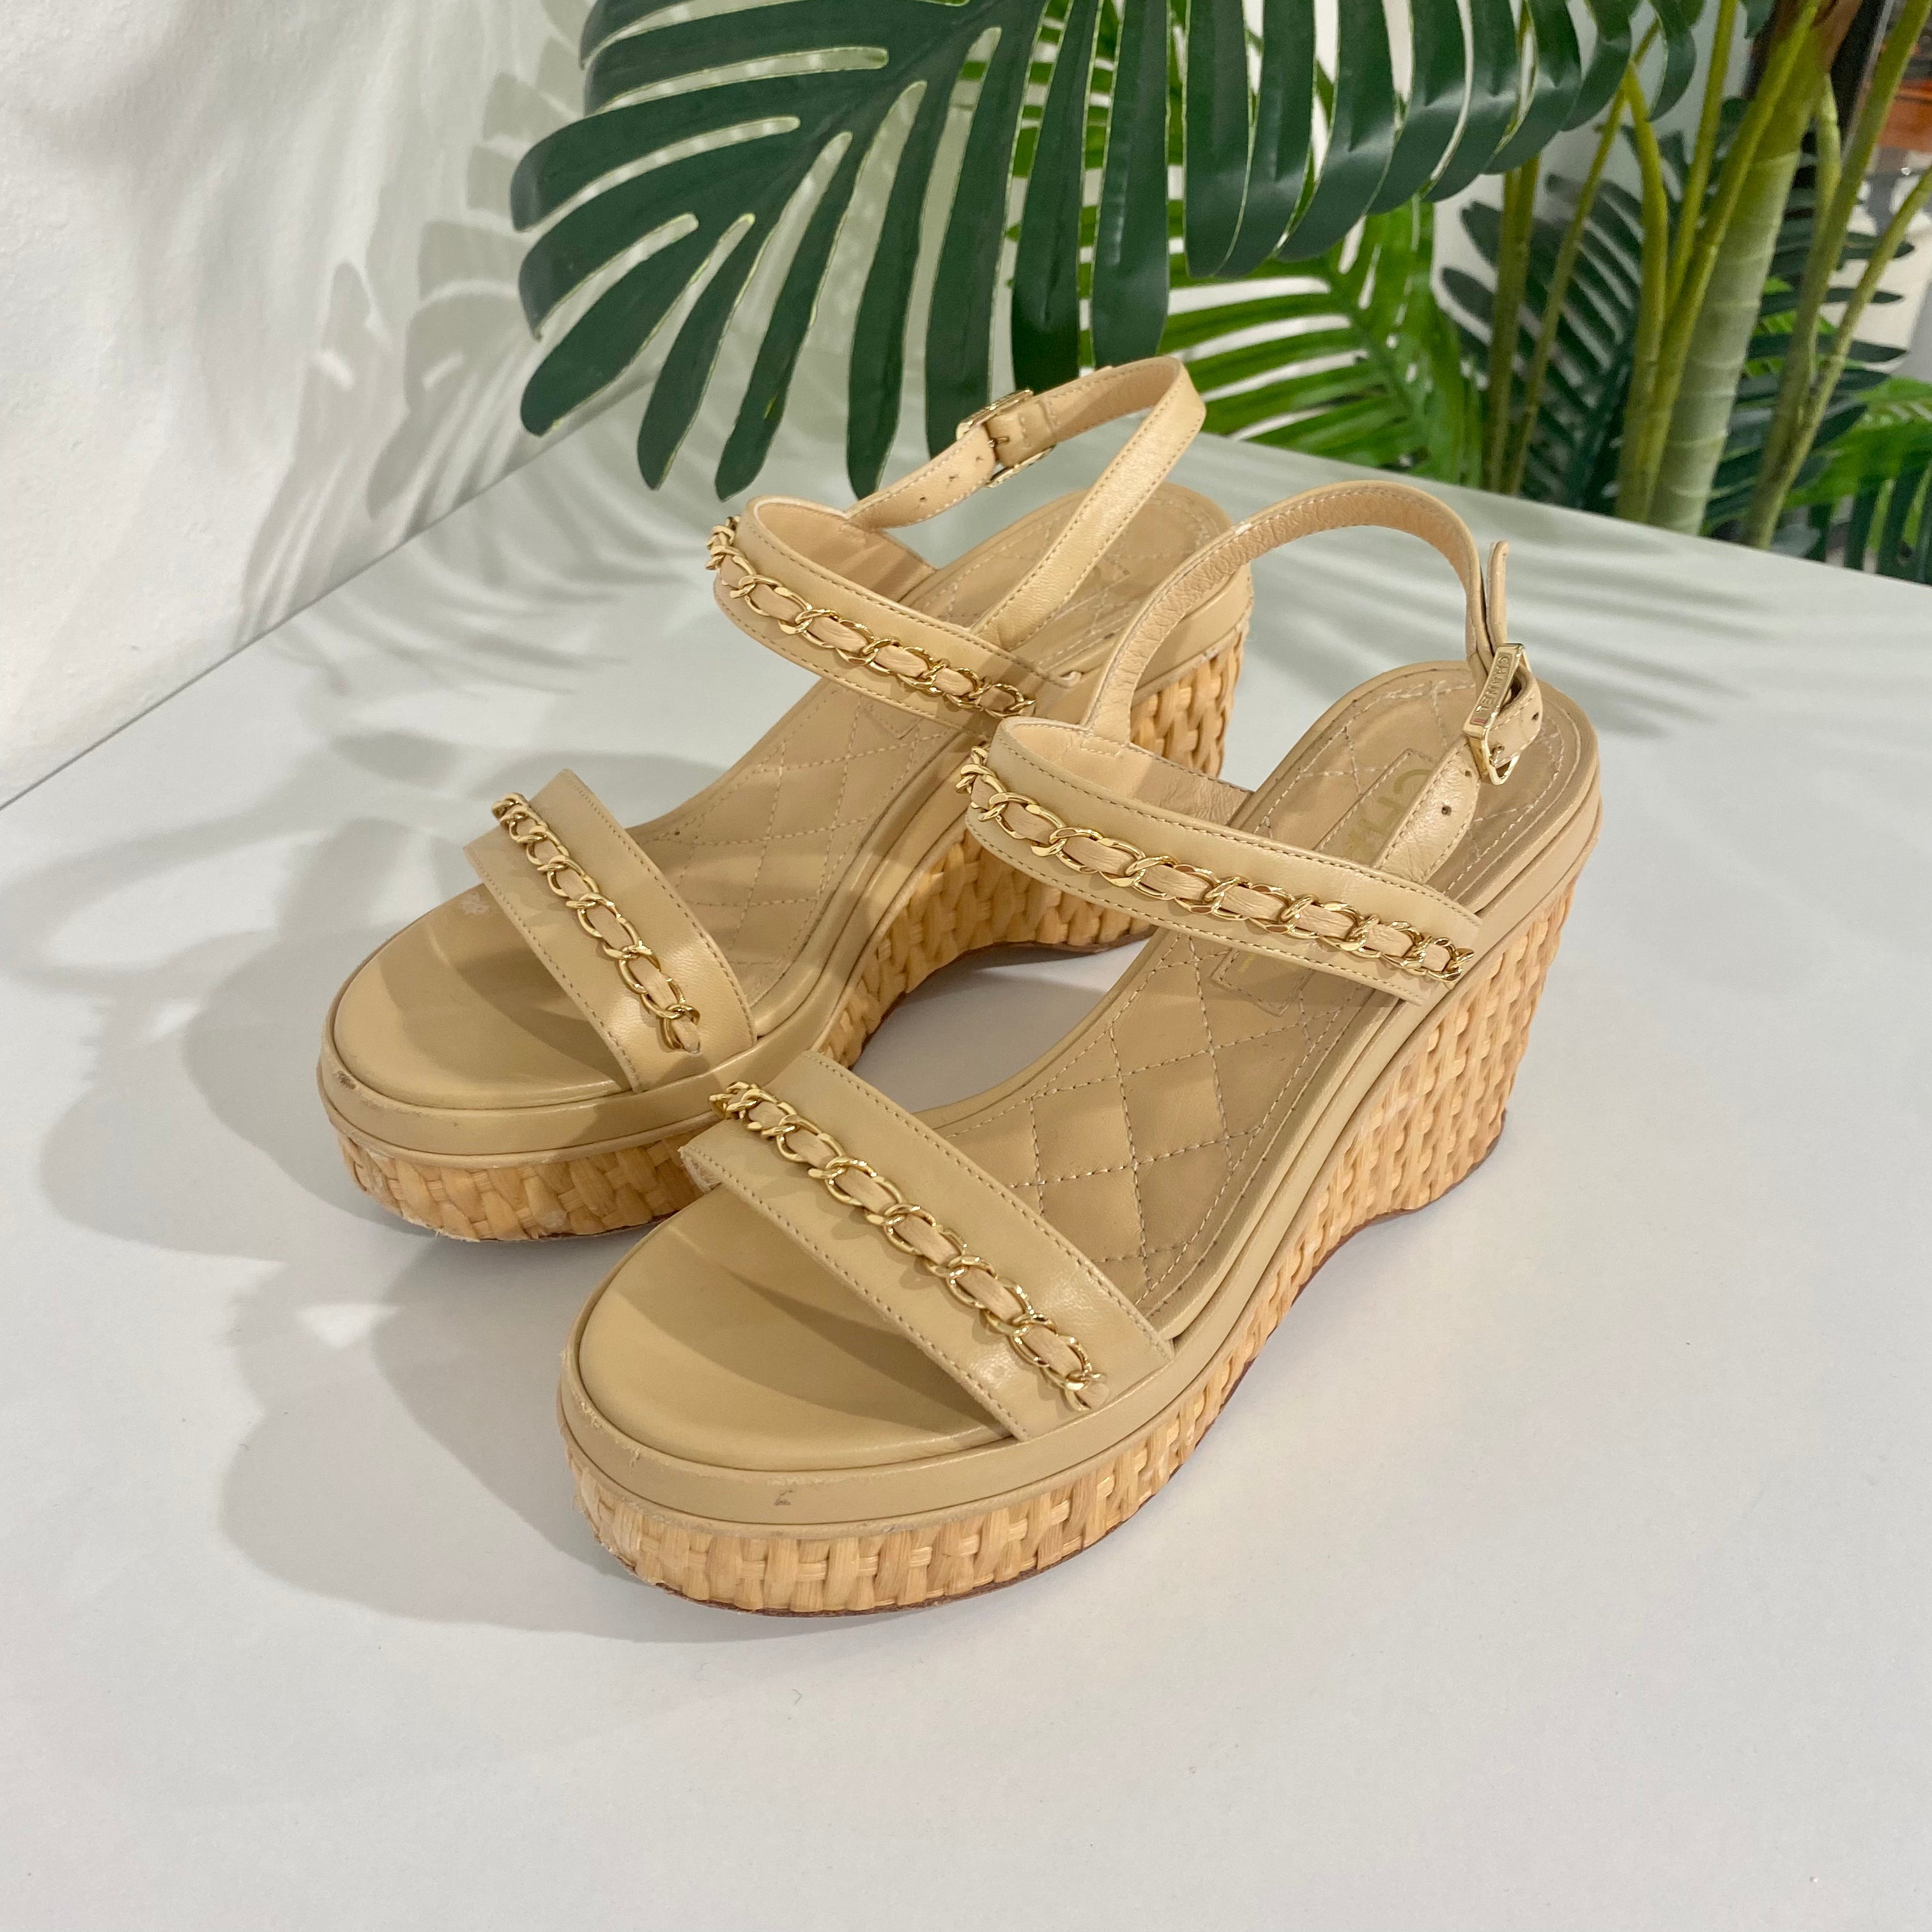 Chanel 2020 Wicker Platform Sandals – Dina C's Fab and Funky